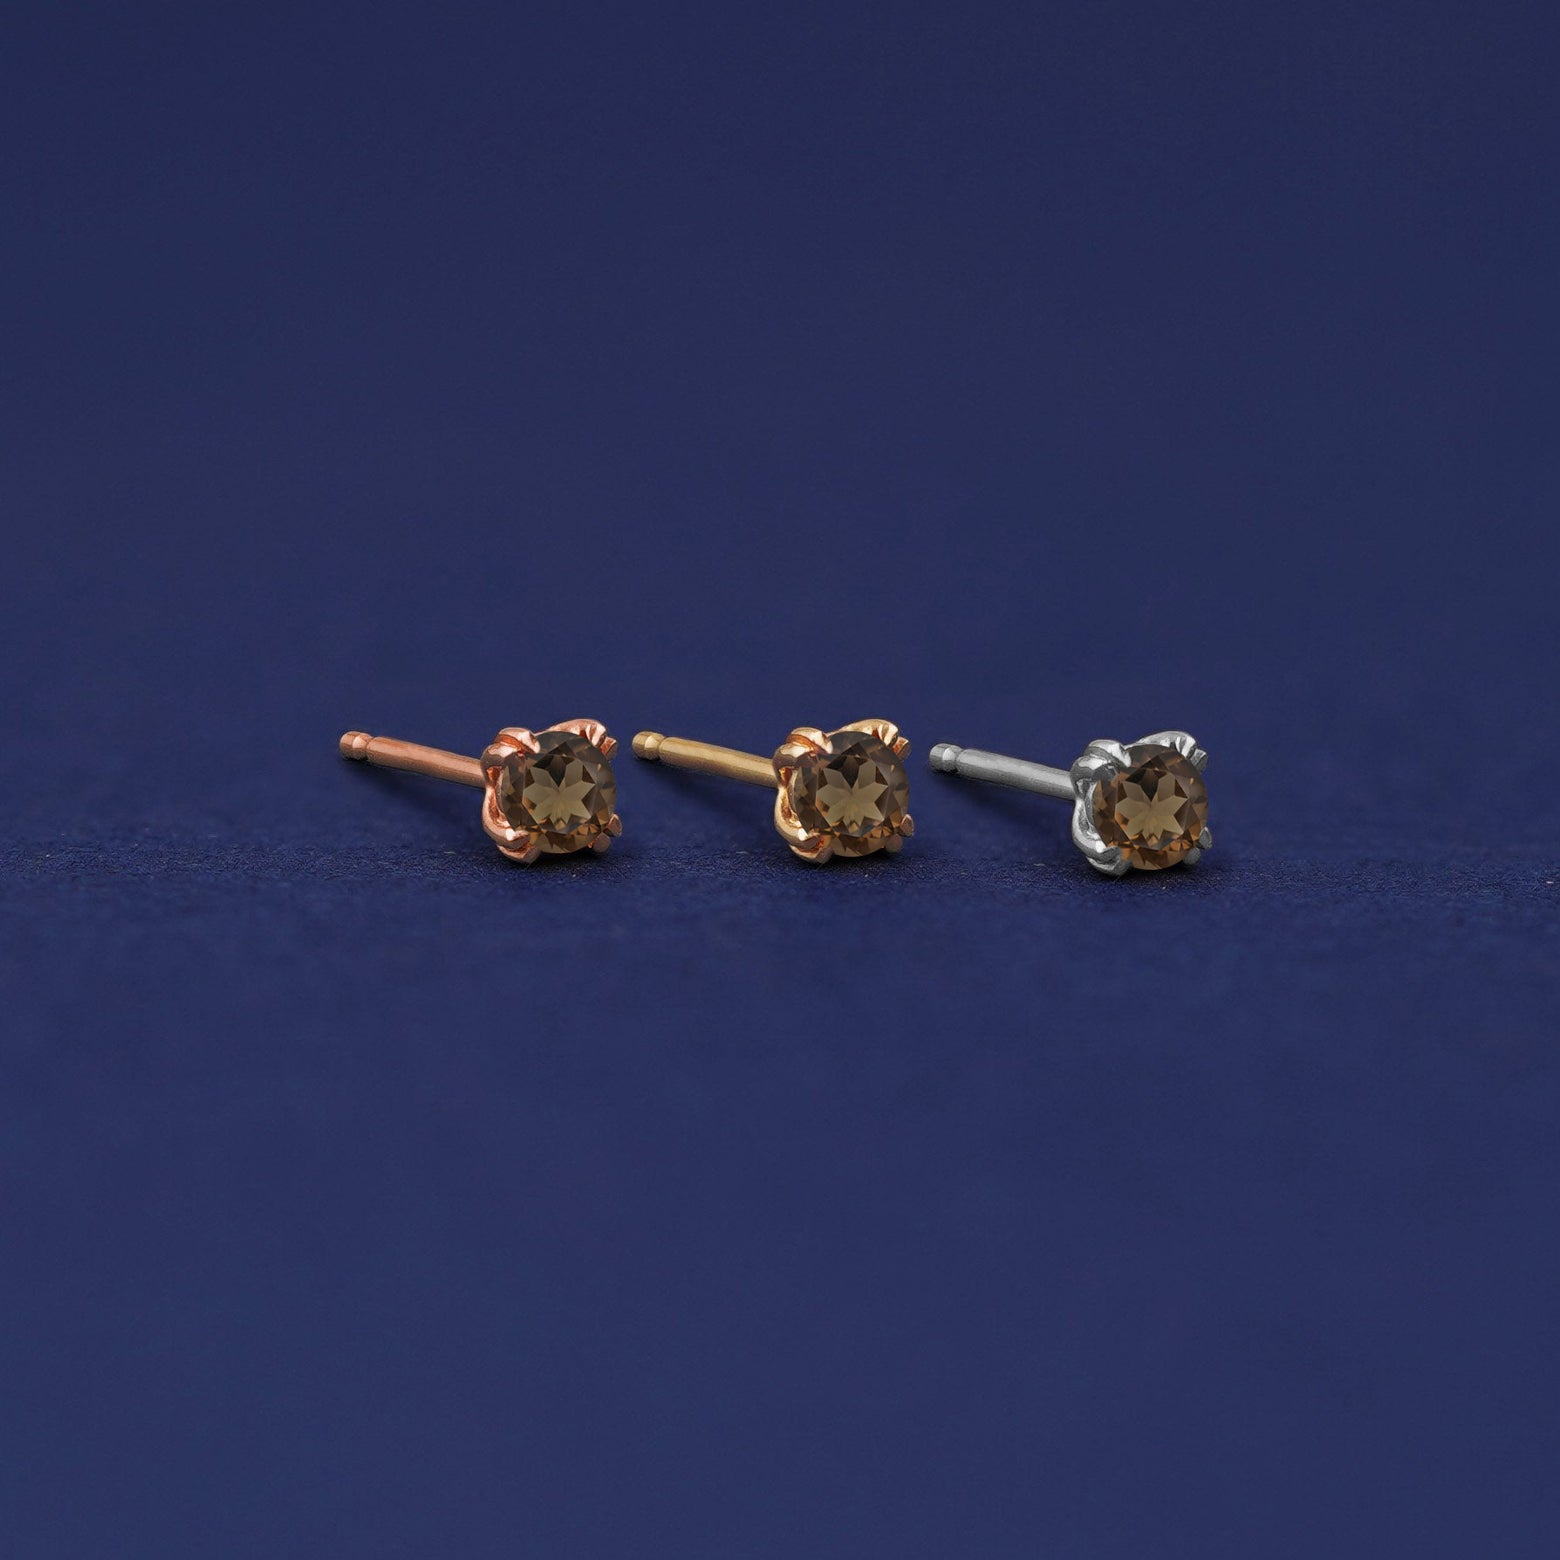 Three versions of the Smoky Quartz Earring shown in options of rose, yellow, and white gold